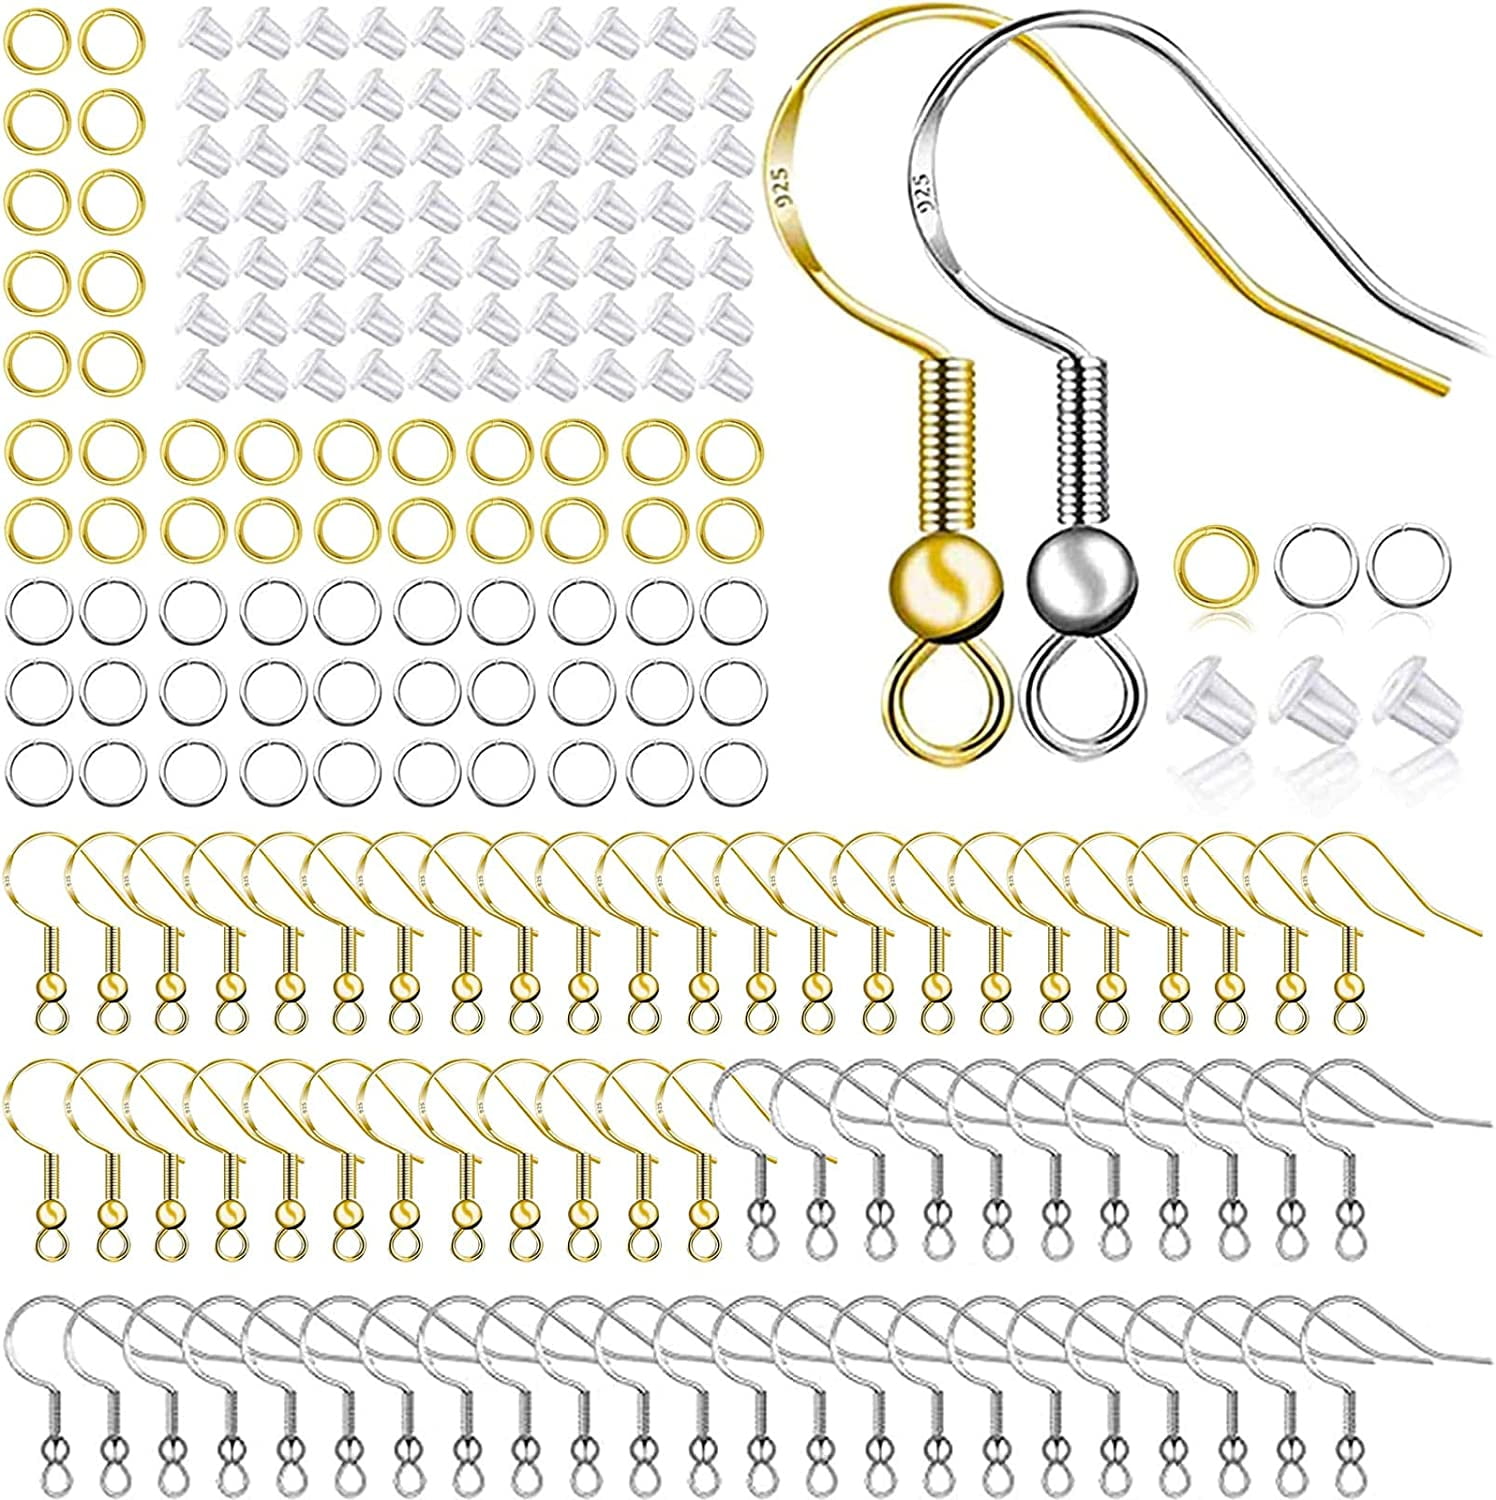 100PCS/50Pairs 925 Sterling Silver Earring Hooks,Ear Wires Fish  Hooks,300pcs Hypoallergenic Earring Making kit with Jump Rings and Clear  Rubber